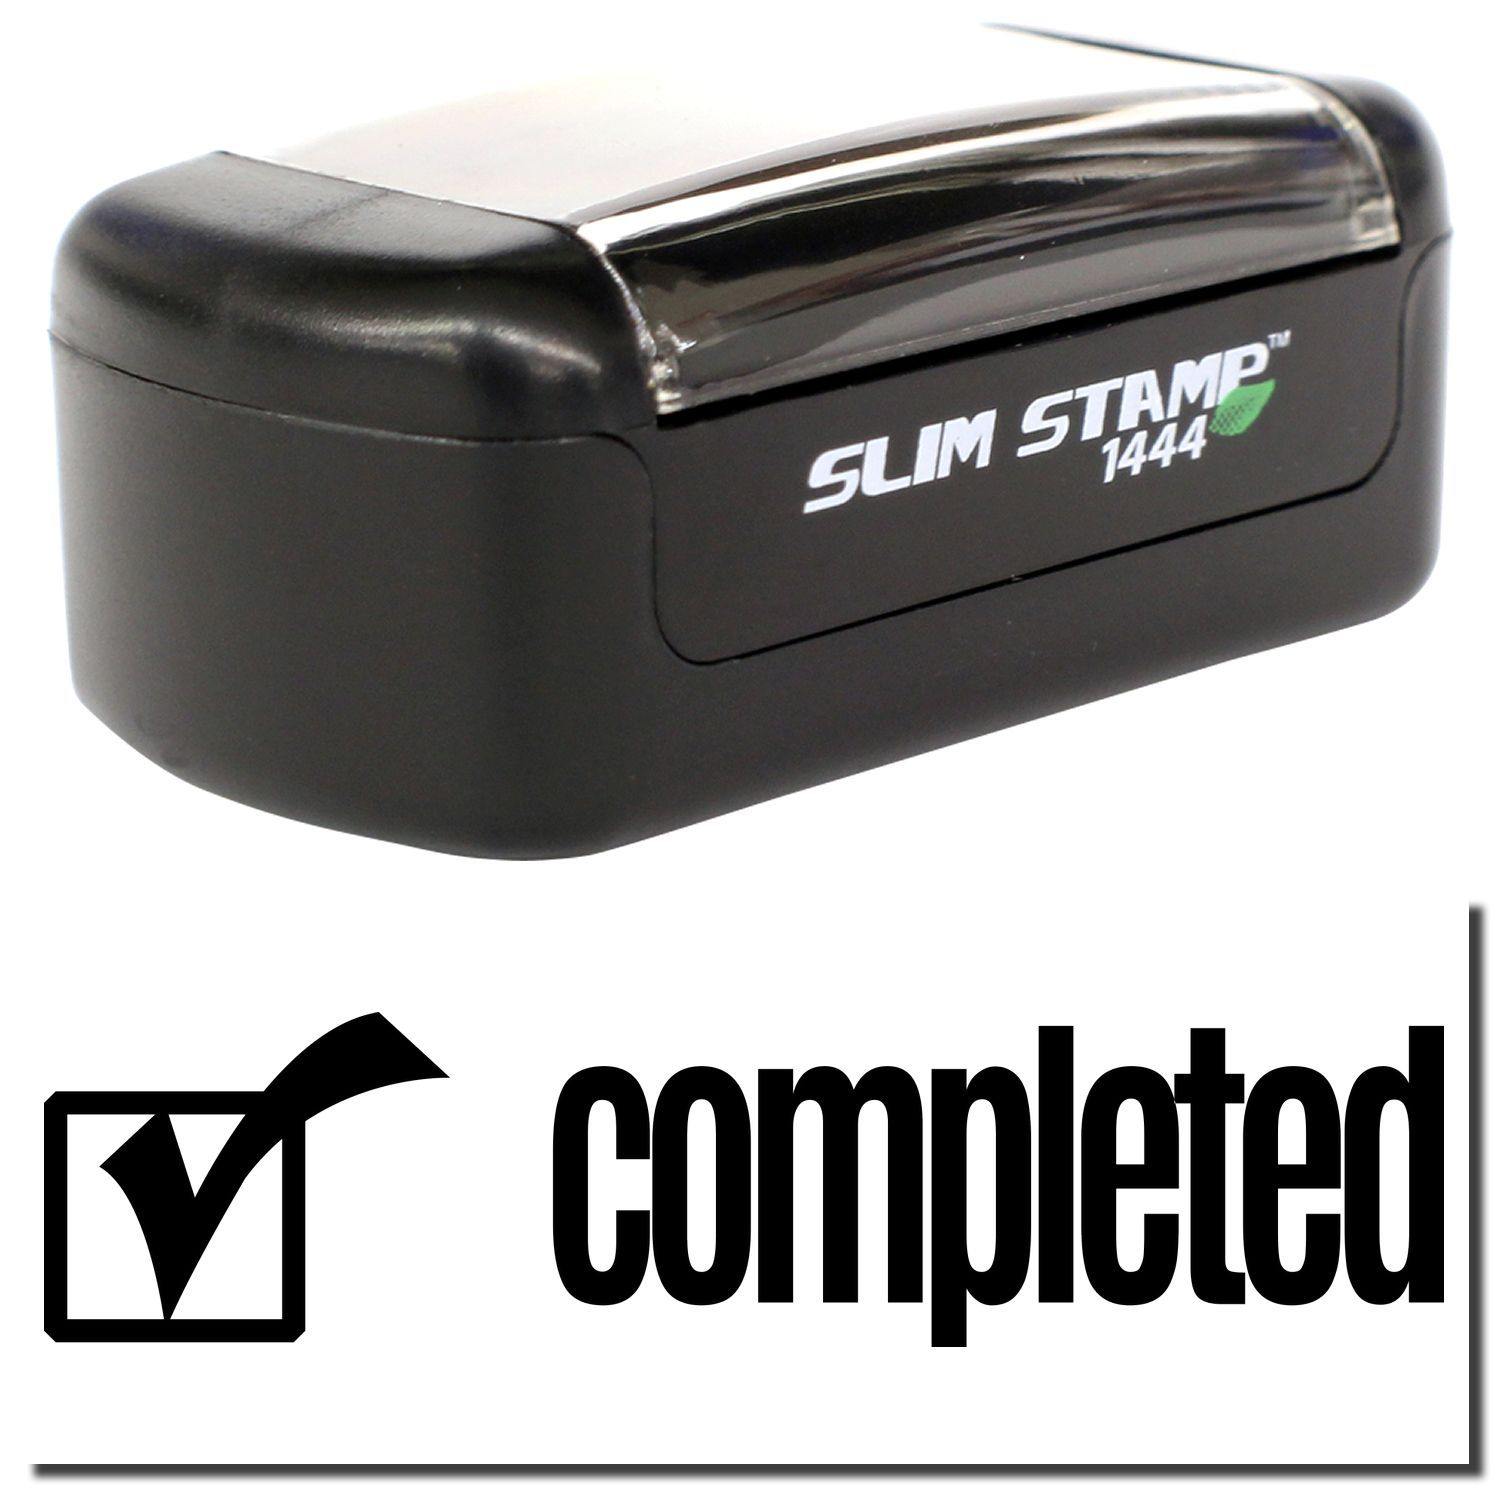 A stock office pre-inked stamp with a stamped image showing how the text "completed" with a checkbox on the left side is displayed after stamping.